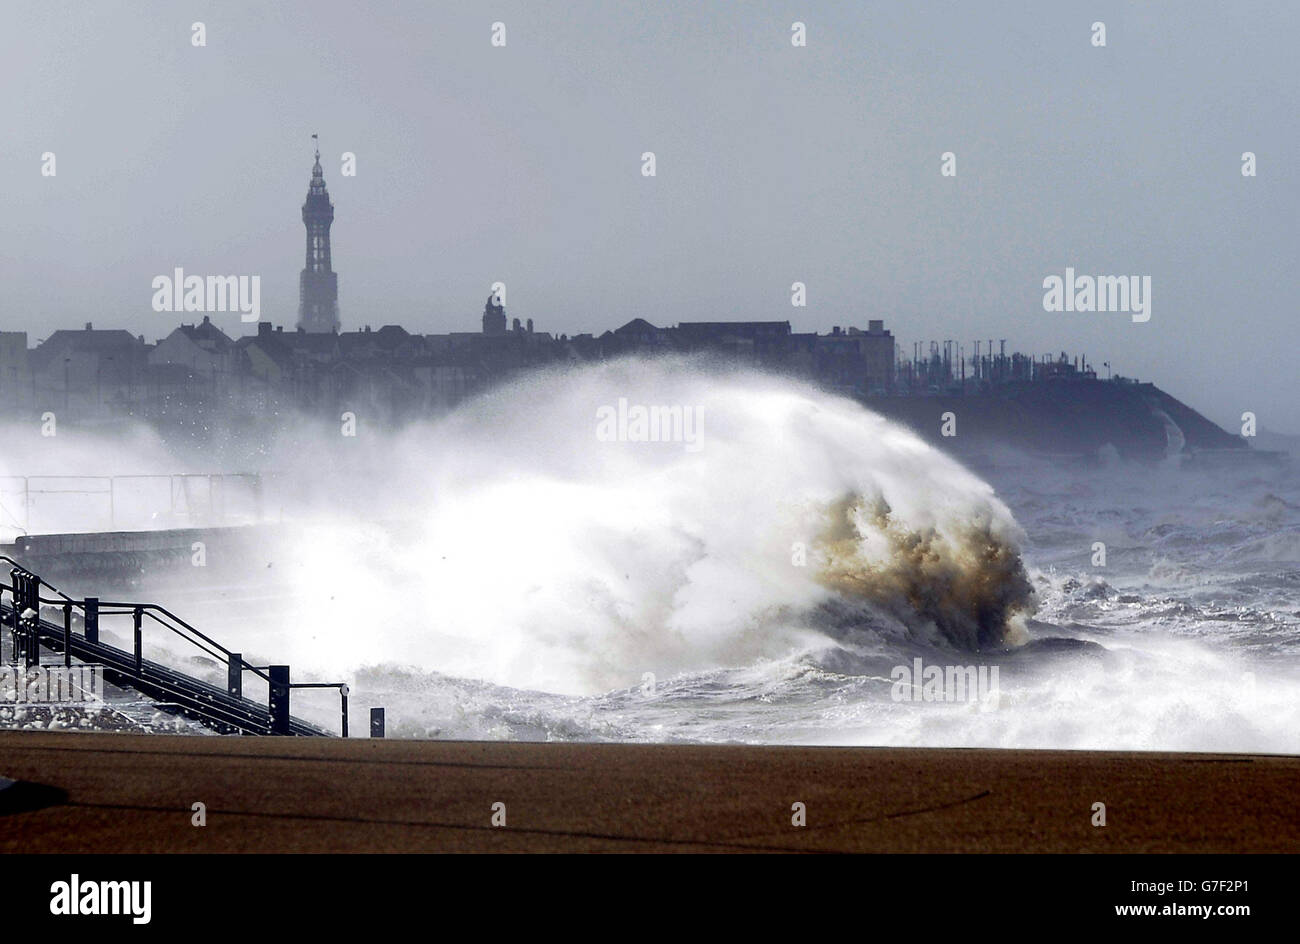 Large waves hit the seafront at Blackpool, with the famous Blackpool Tower, as the remnants of Hurricane Gonzalo blew into Britain, causing rush-hour travel misery for road, rail and air travellers. Stock Photo